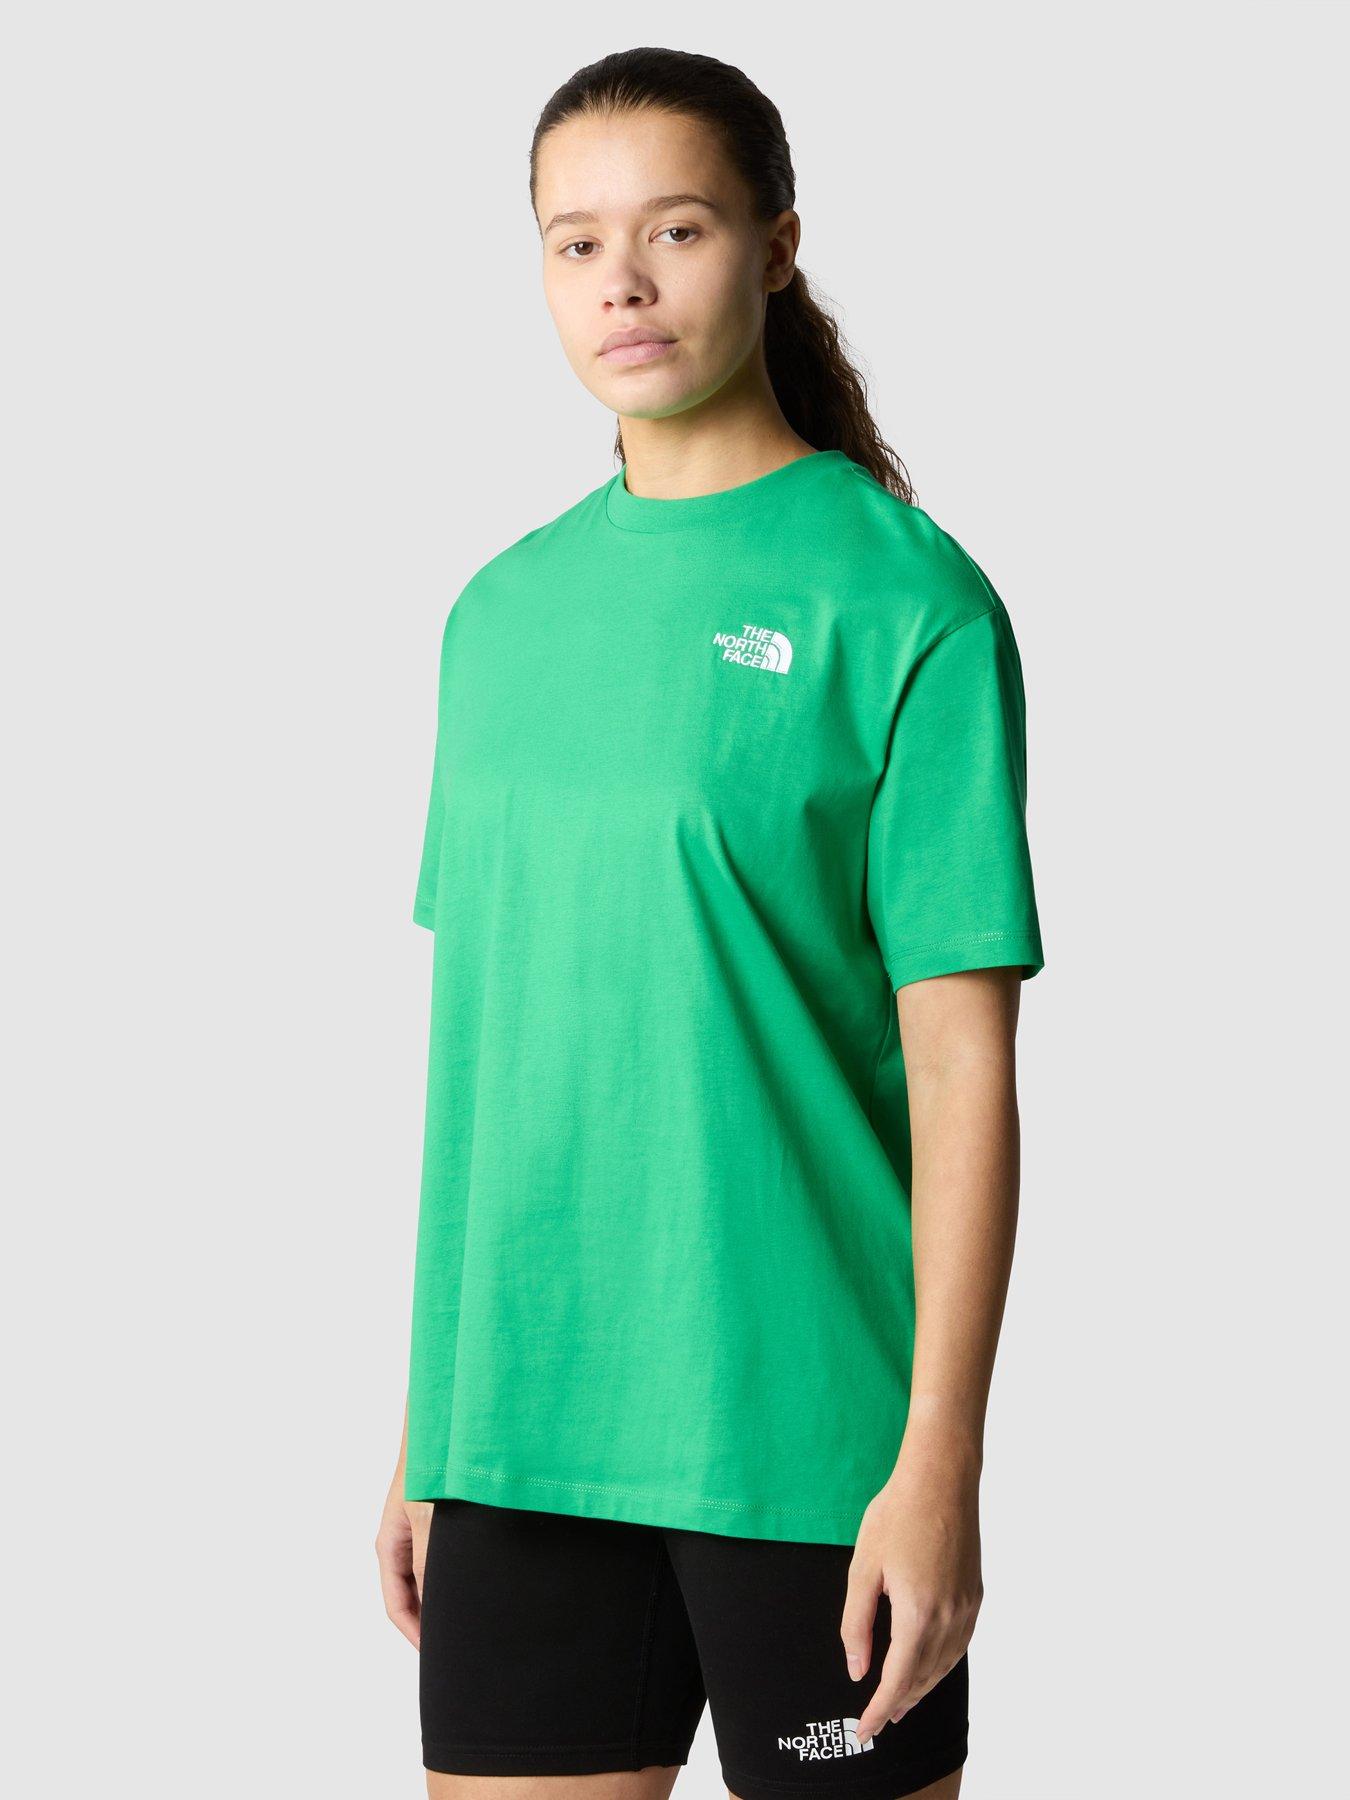 The north face, Tops & t-shirts, Women